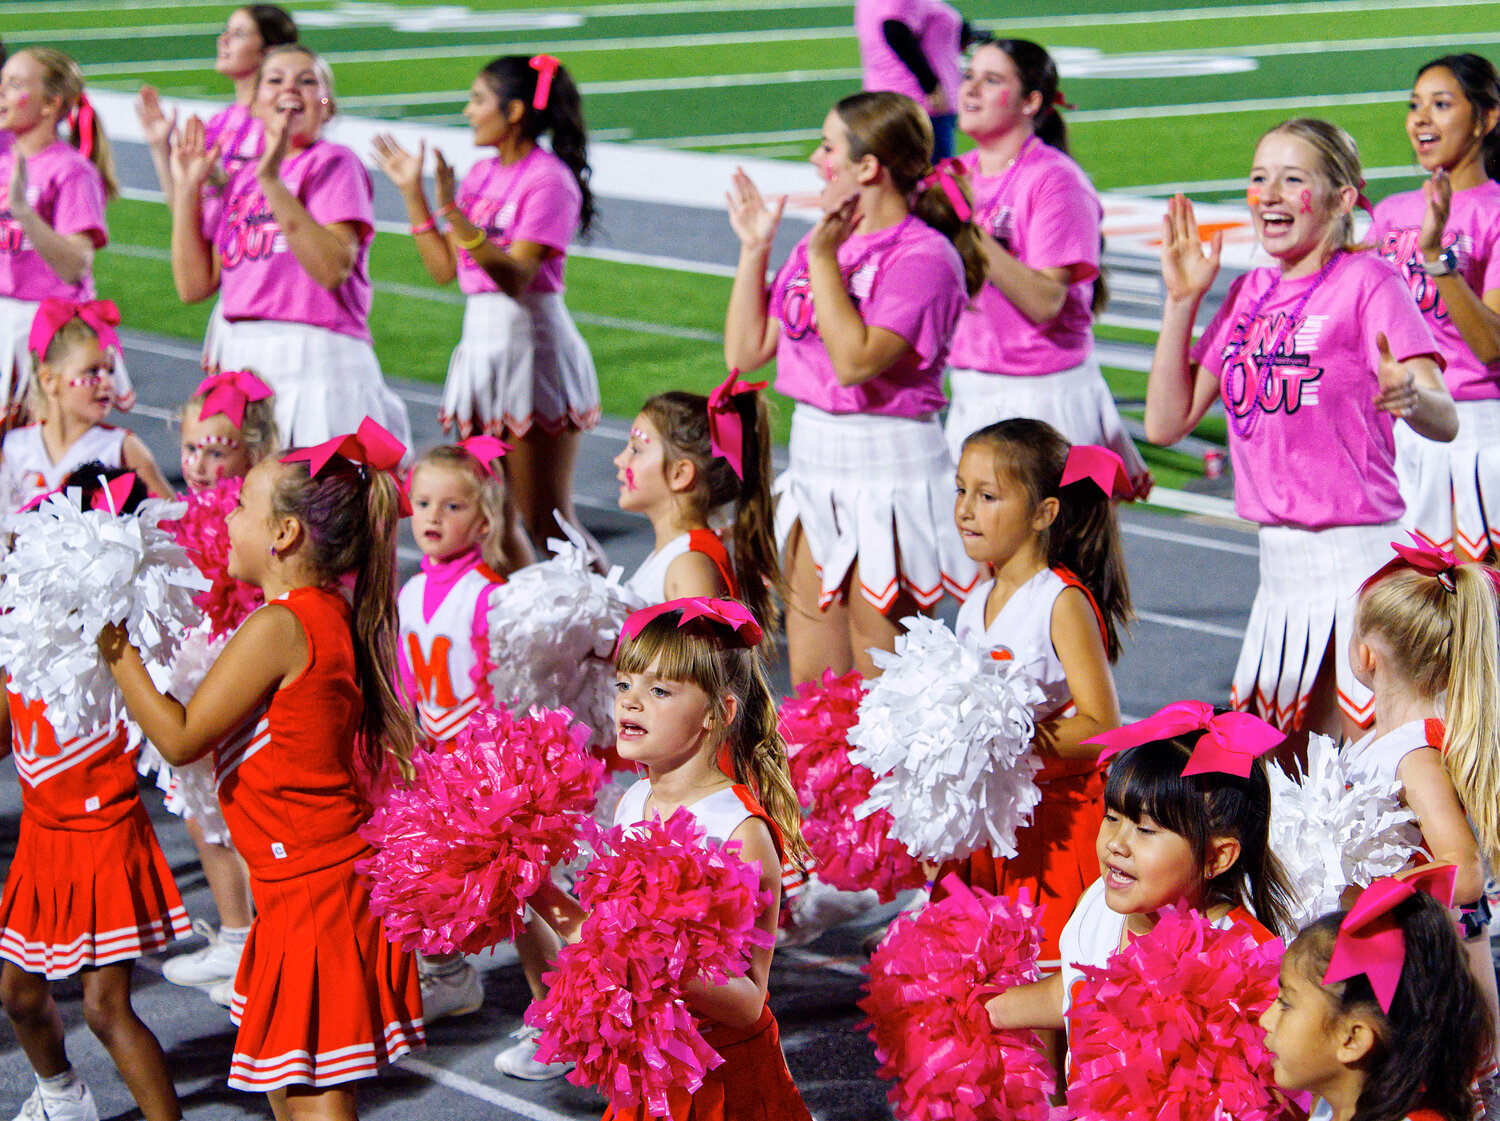 Some younger Yellowjacket cheerleaders got to join the varsity squad at Friday's game against Winnsboro. [find further football photos]